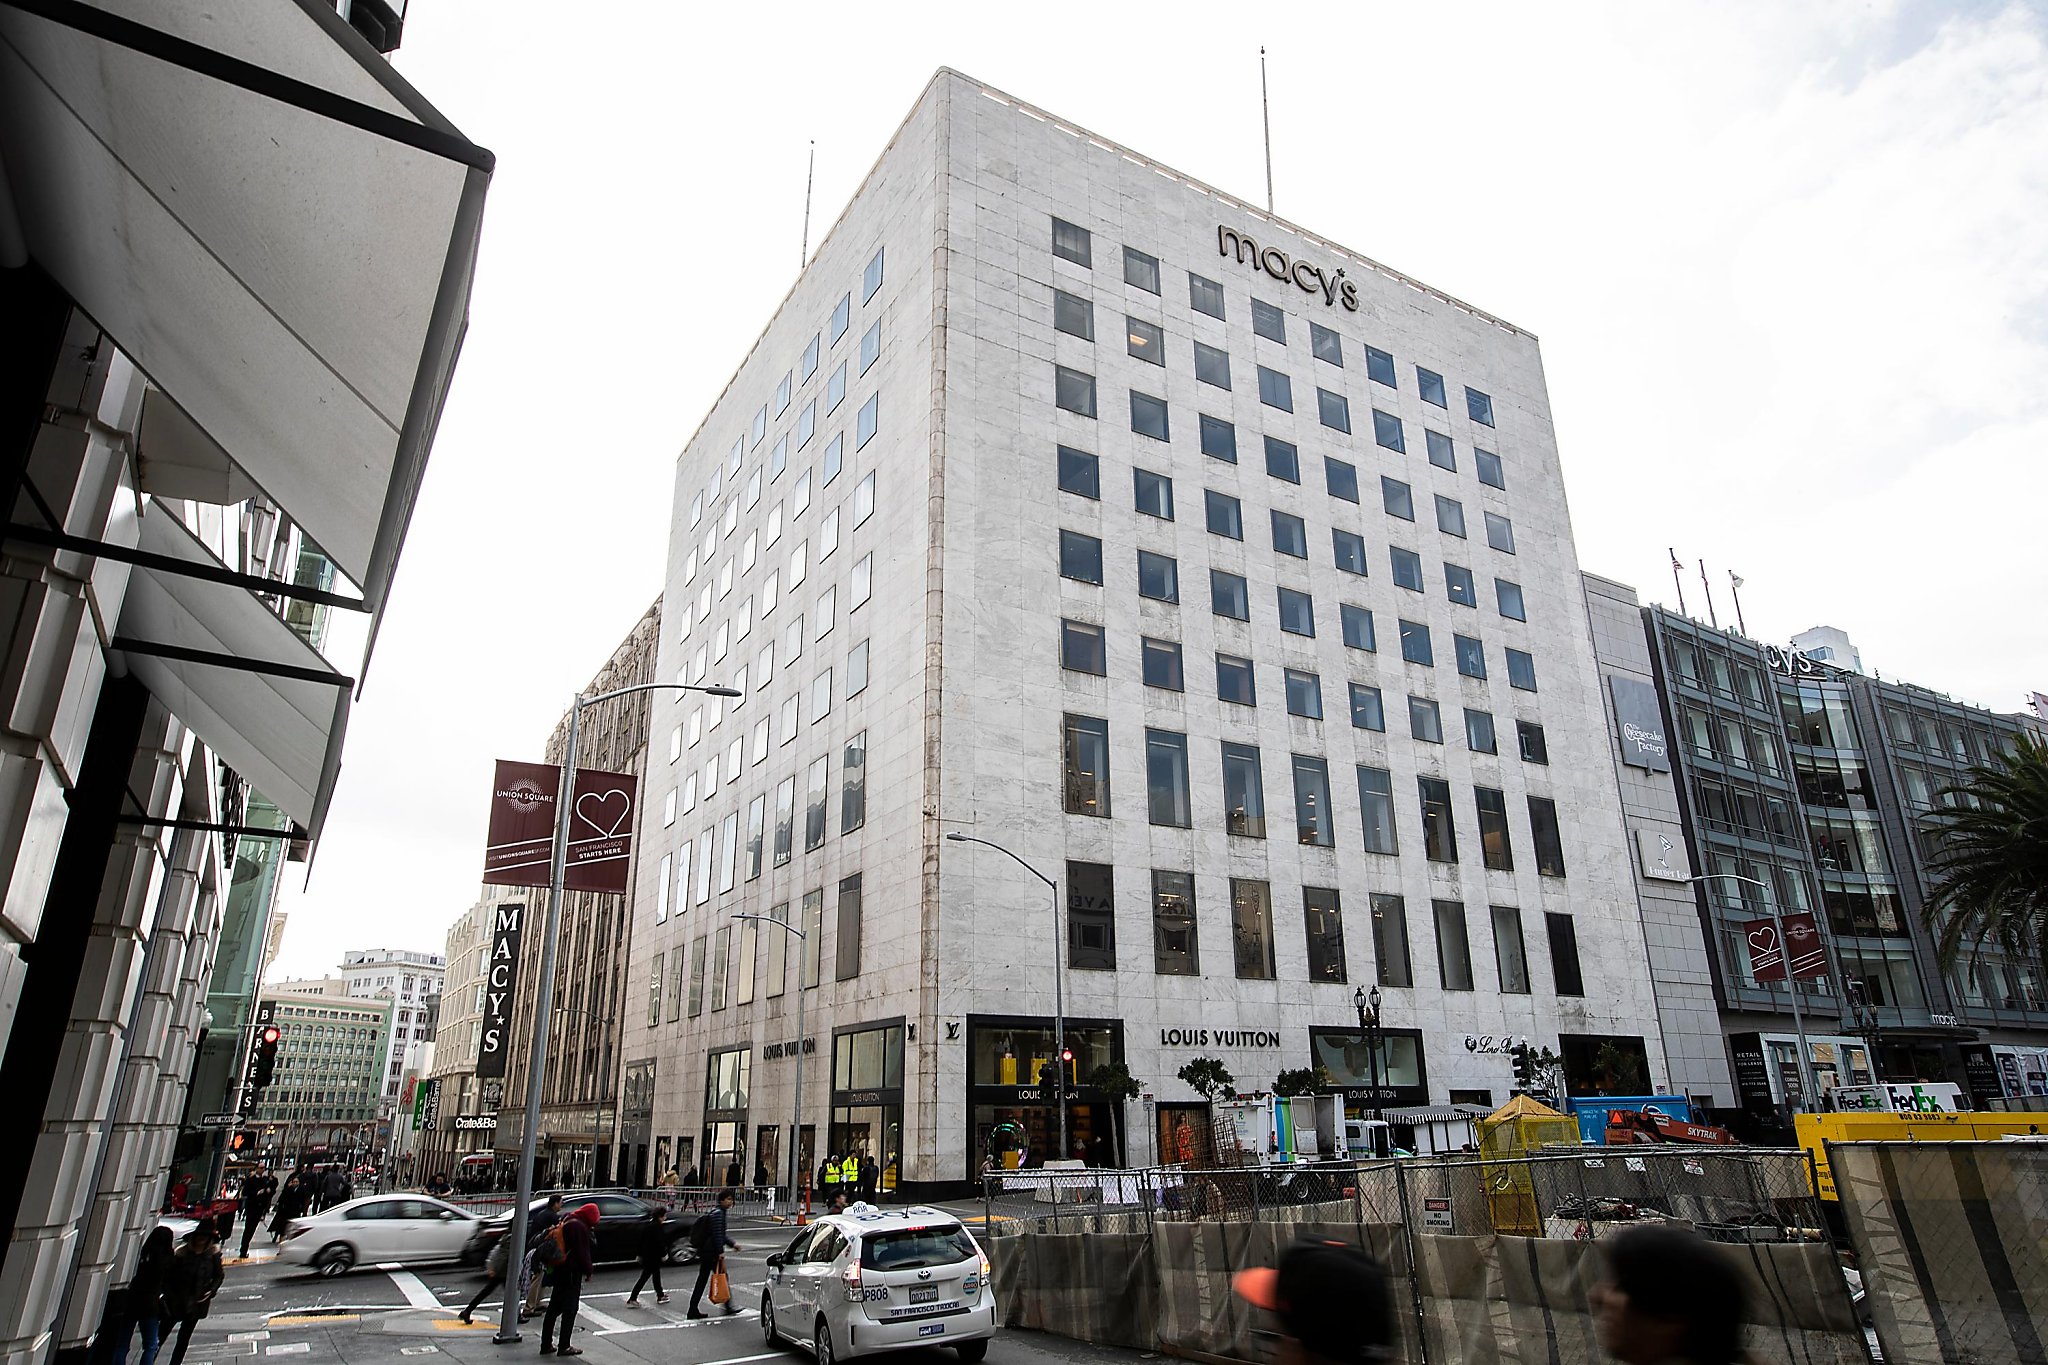 New plan for old Macy's building: Condos atop Union Square icon